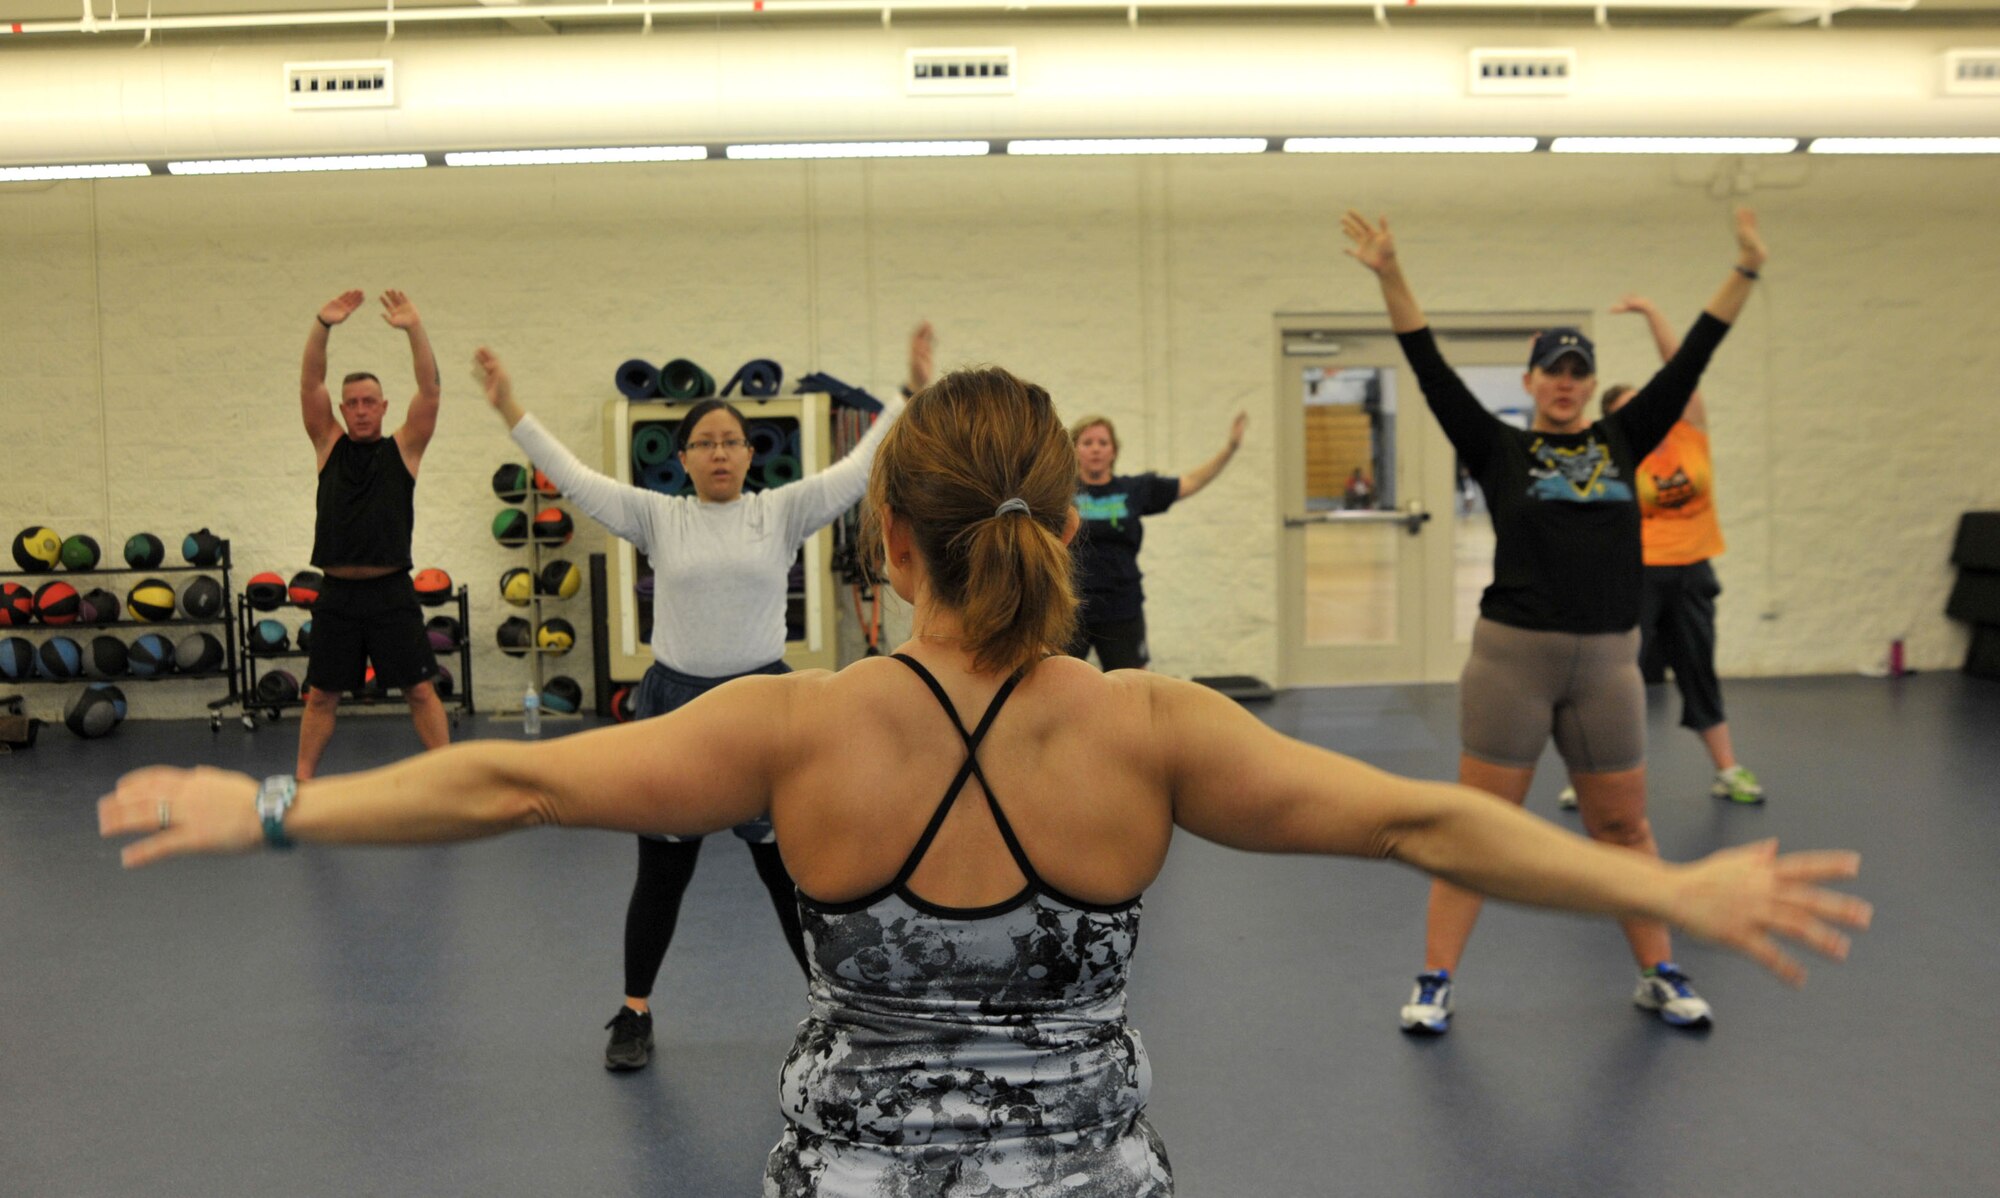 Nicole Larson, Aderholt Gym Kettlebell Fit instructor, leads the class in stretches at Hurlburt Field, Fla., Jan. 27, 2014. Larson said a 45-minute workout with kettlebells  can target flexibility, cardio, strength and endurance. (U.S. Air Force photo/Airman 1st Class Andrea Posey)